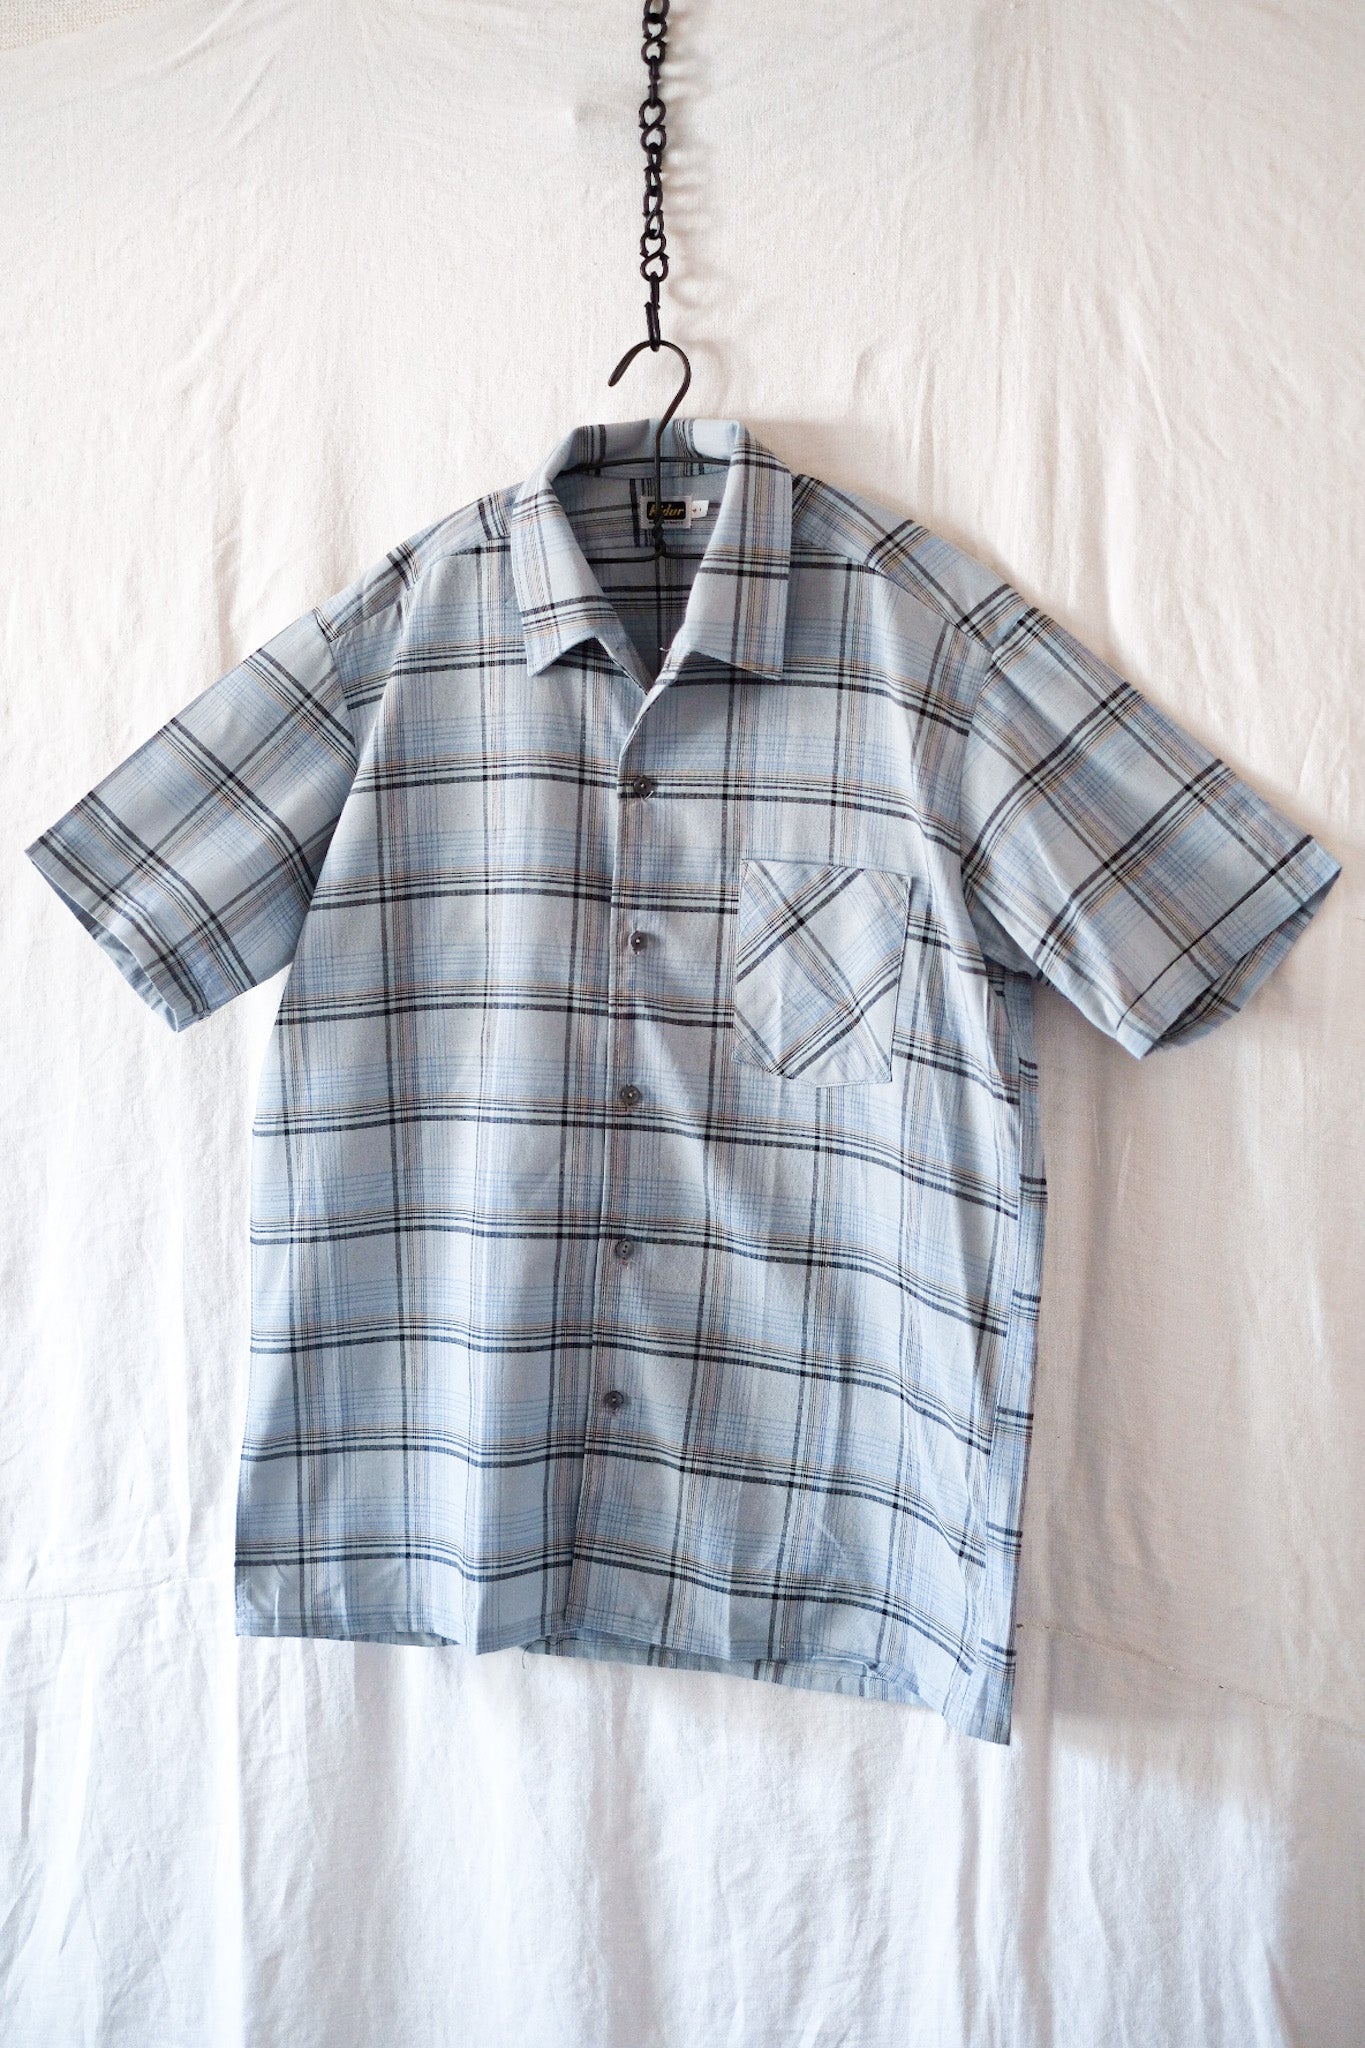 [~ 70's] French Vintage Short Sleeve Shirt "Dead Stock"